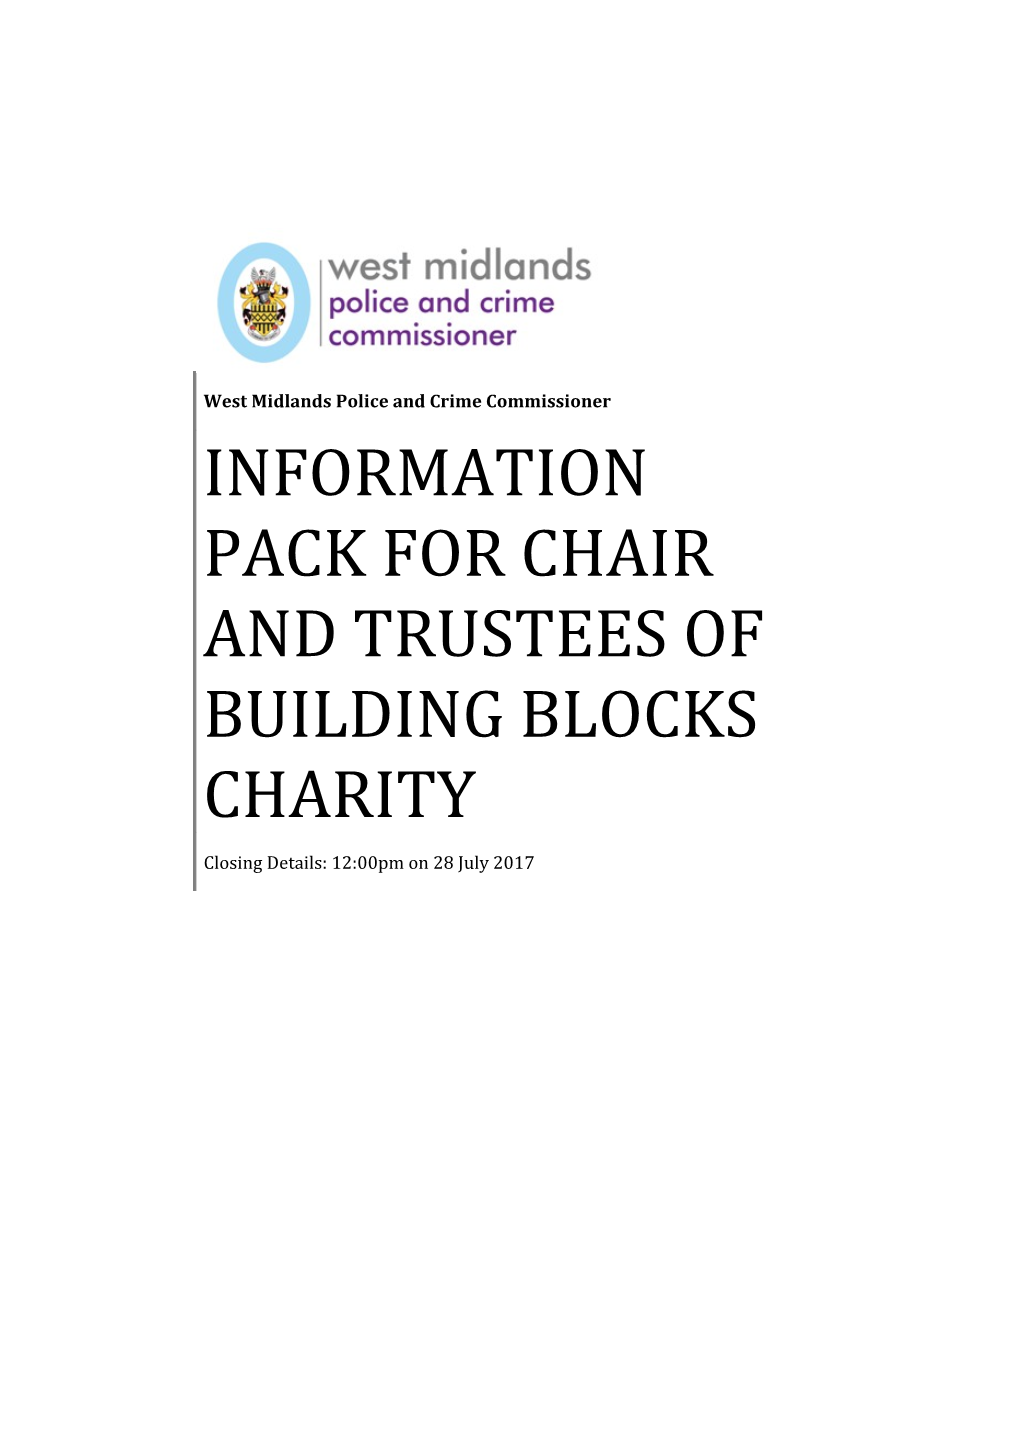 Job Pack for Chair and Trustee of Building Blocks Charity